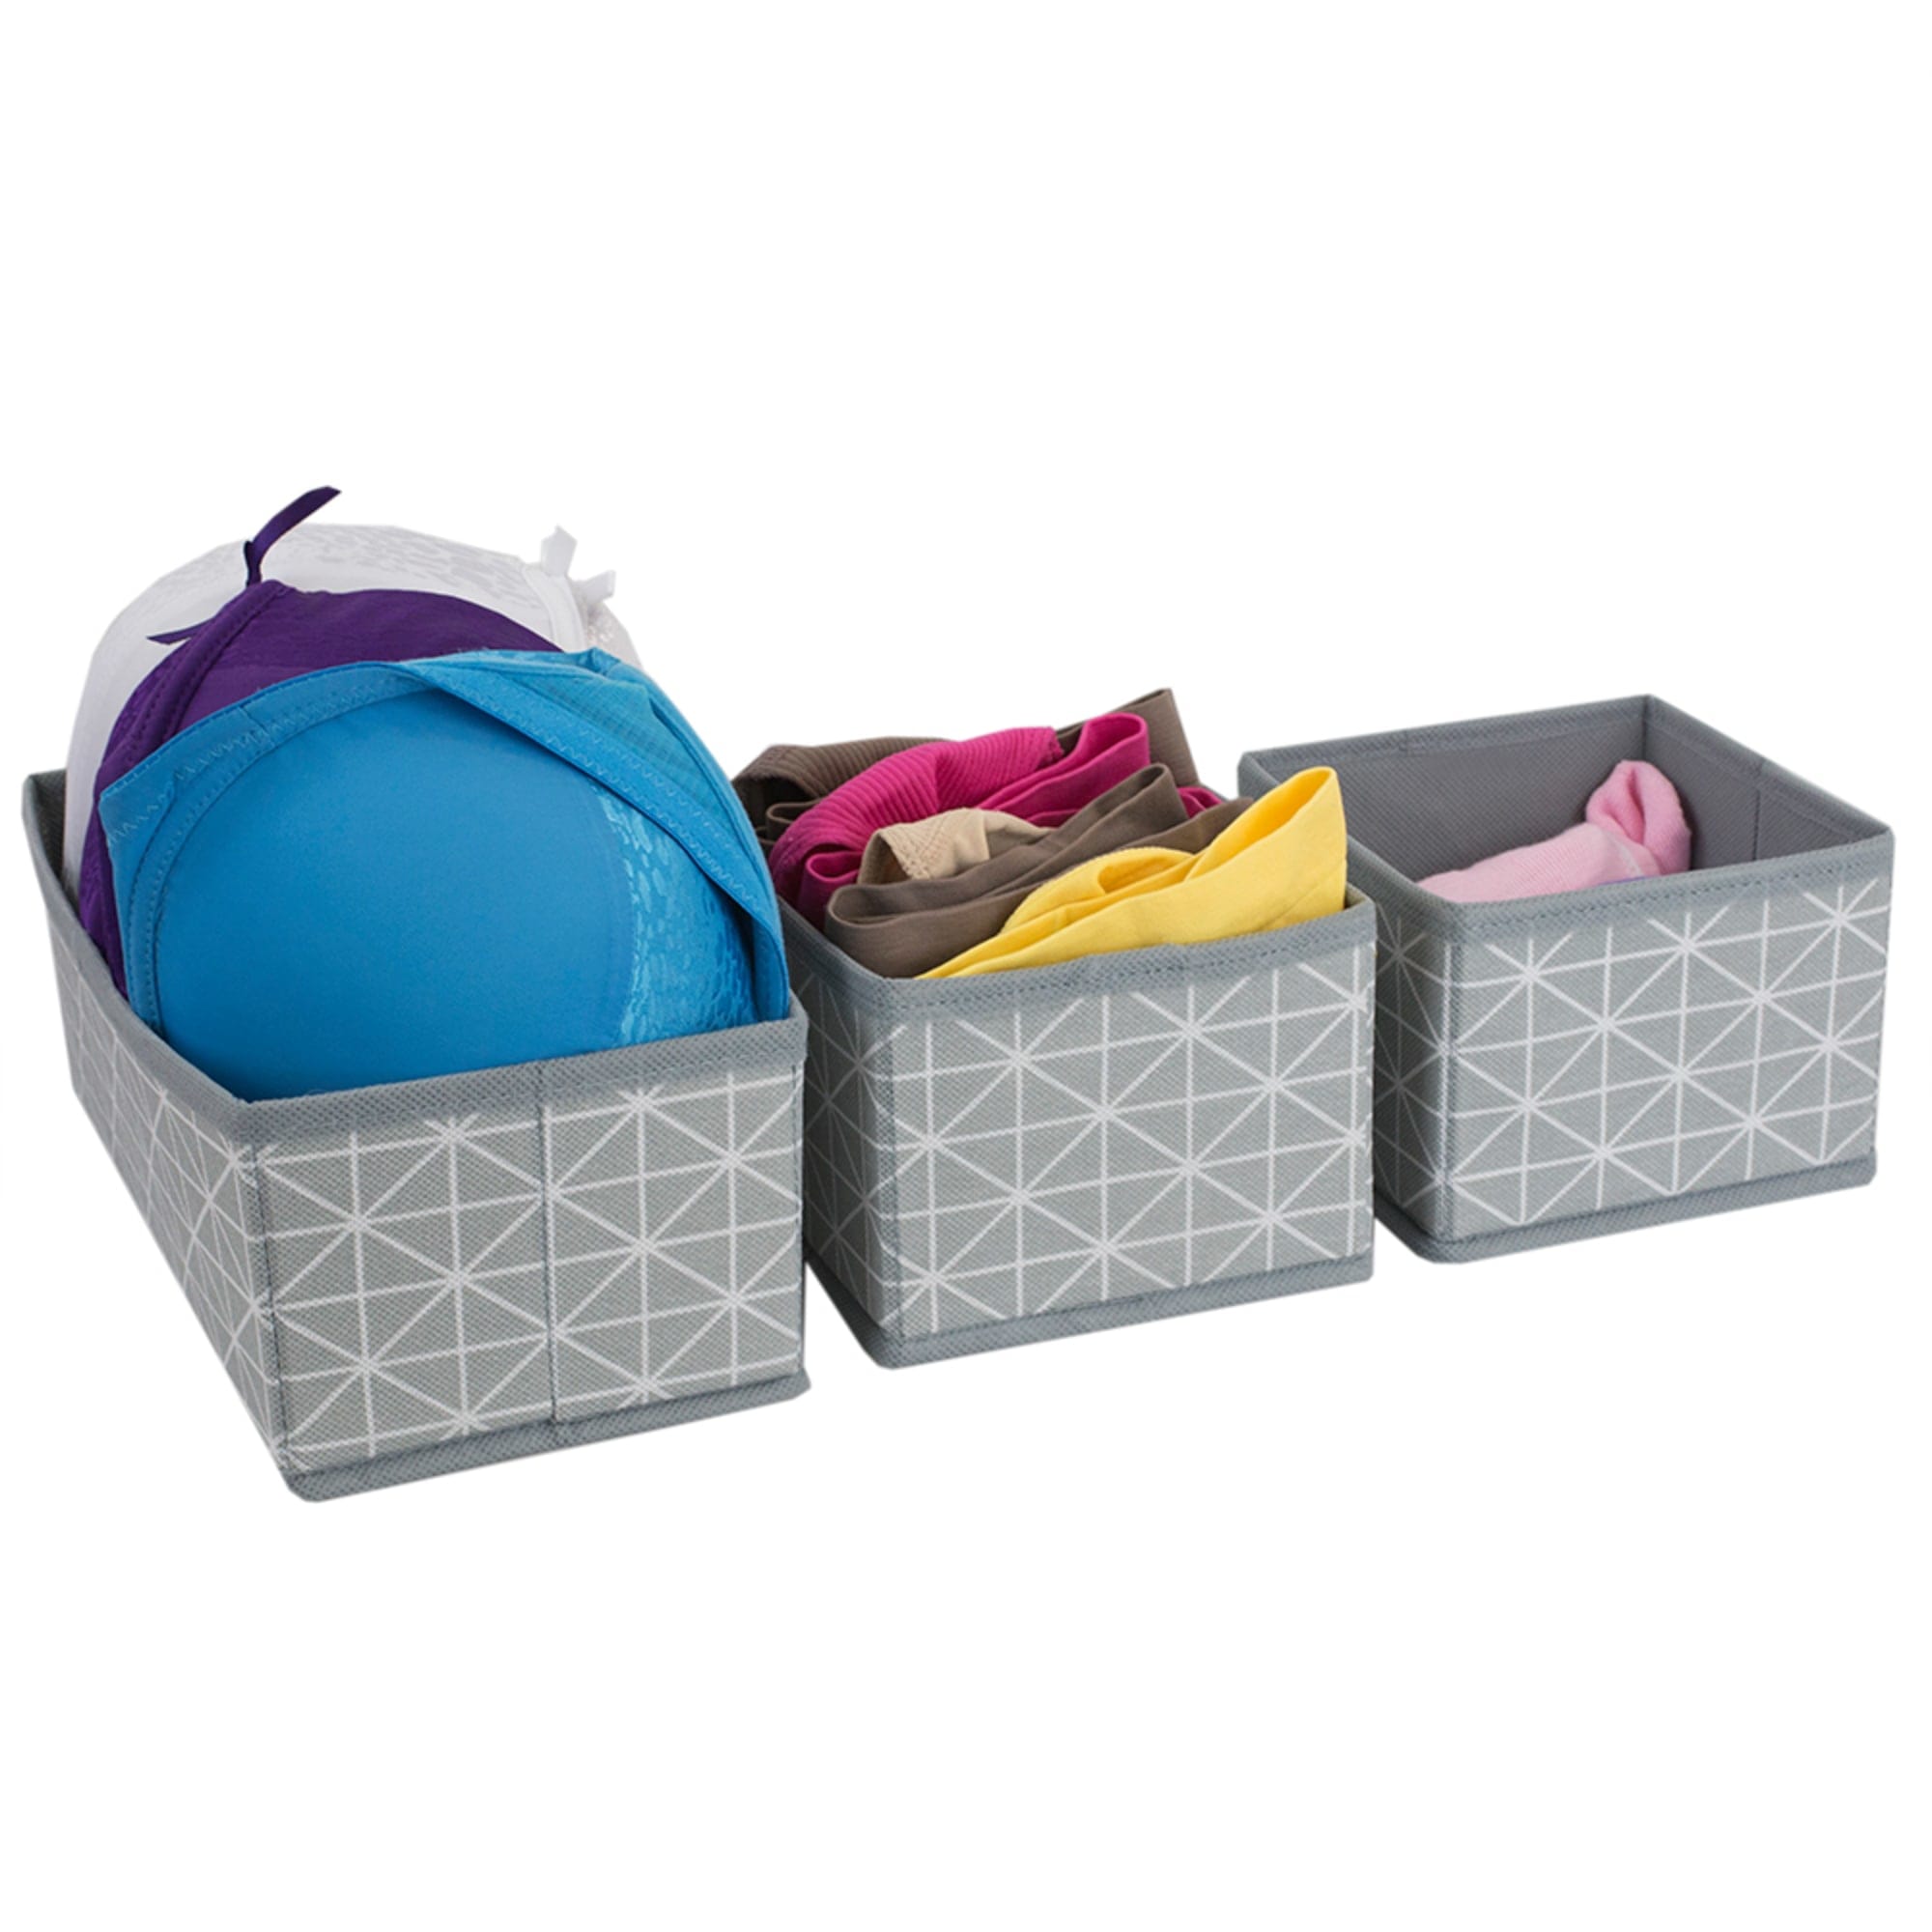 Home Basics Diamond Collection 3 Piece Drawer Organizer Set $4.00 EACH, CASE PACK OF 12